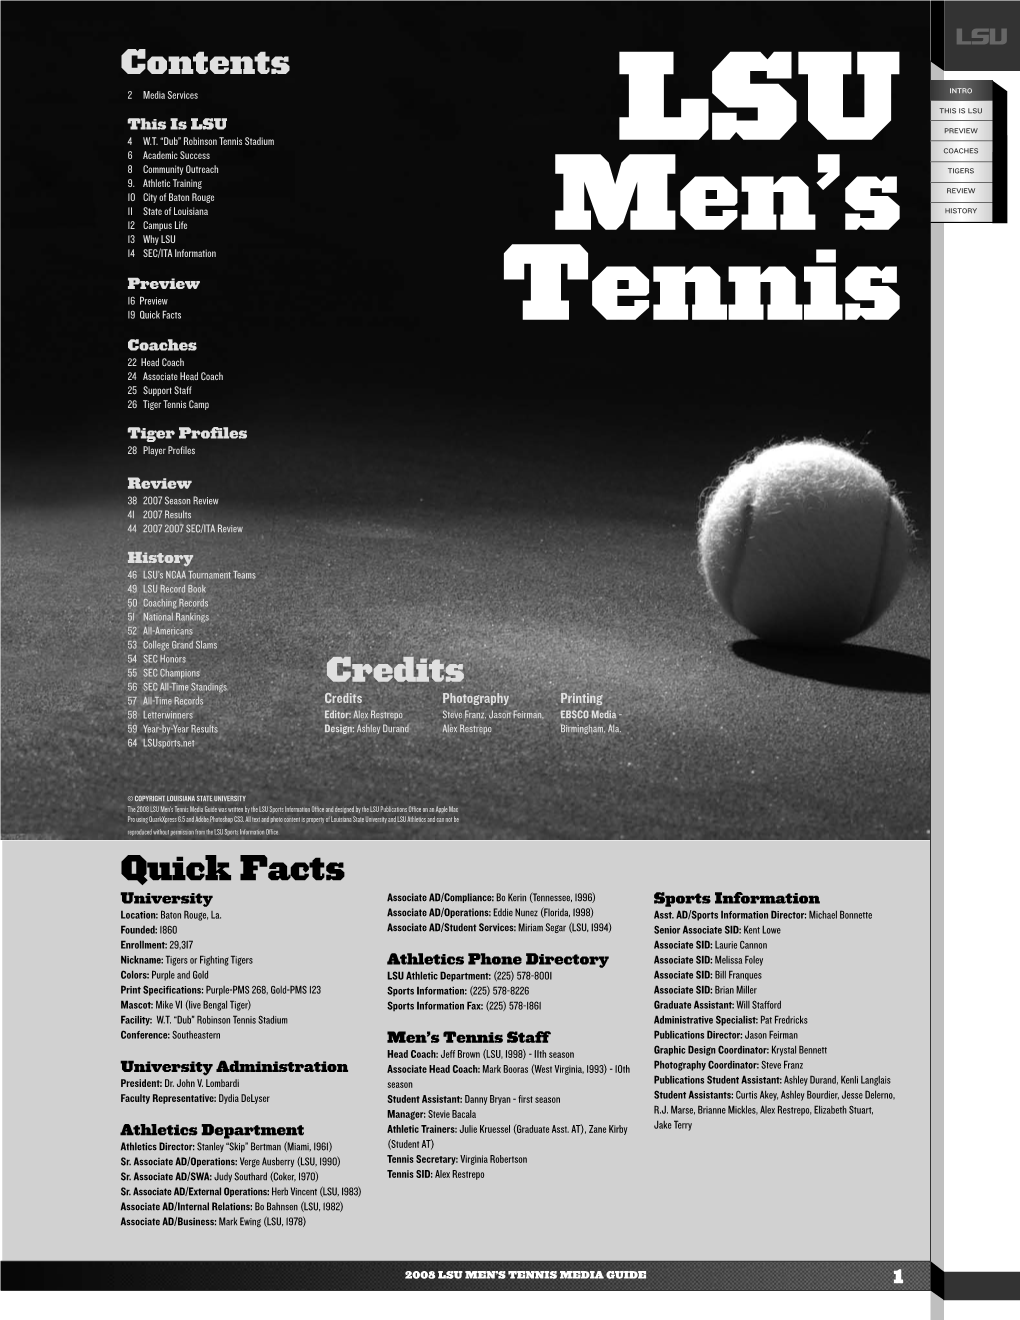 Men's Tennis by the Numbers